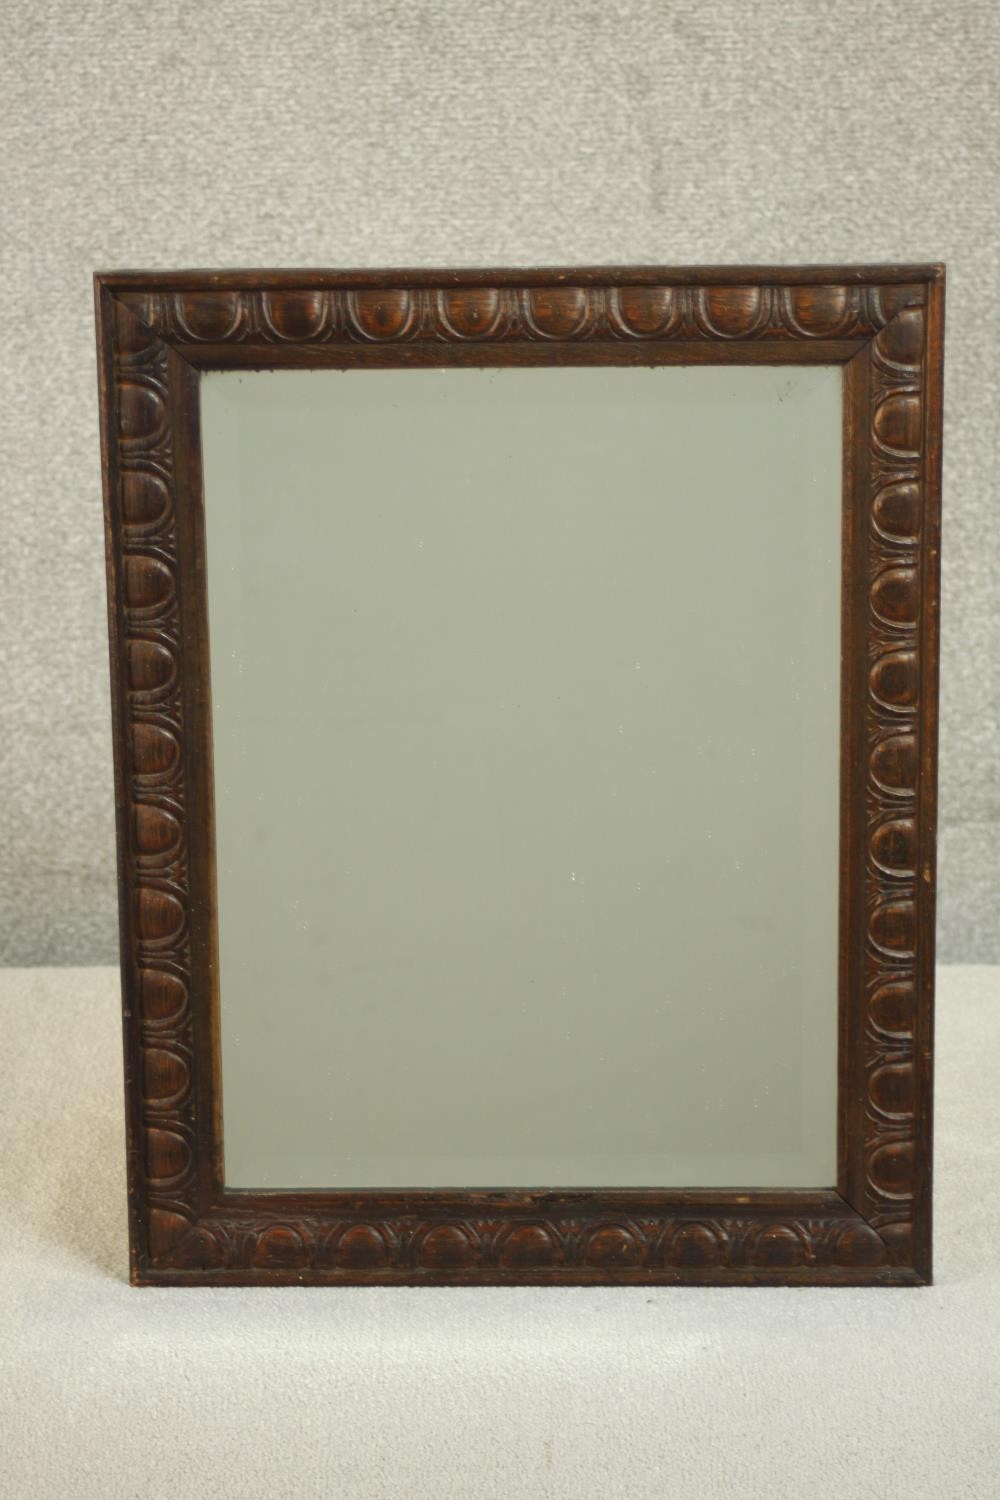 An early 20th century rectangular oak wall mirror, the frame carved with an egg and dart type